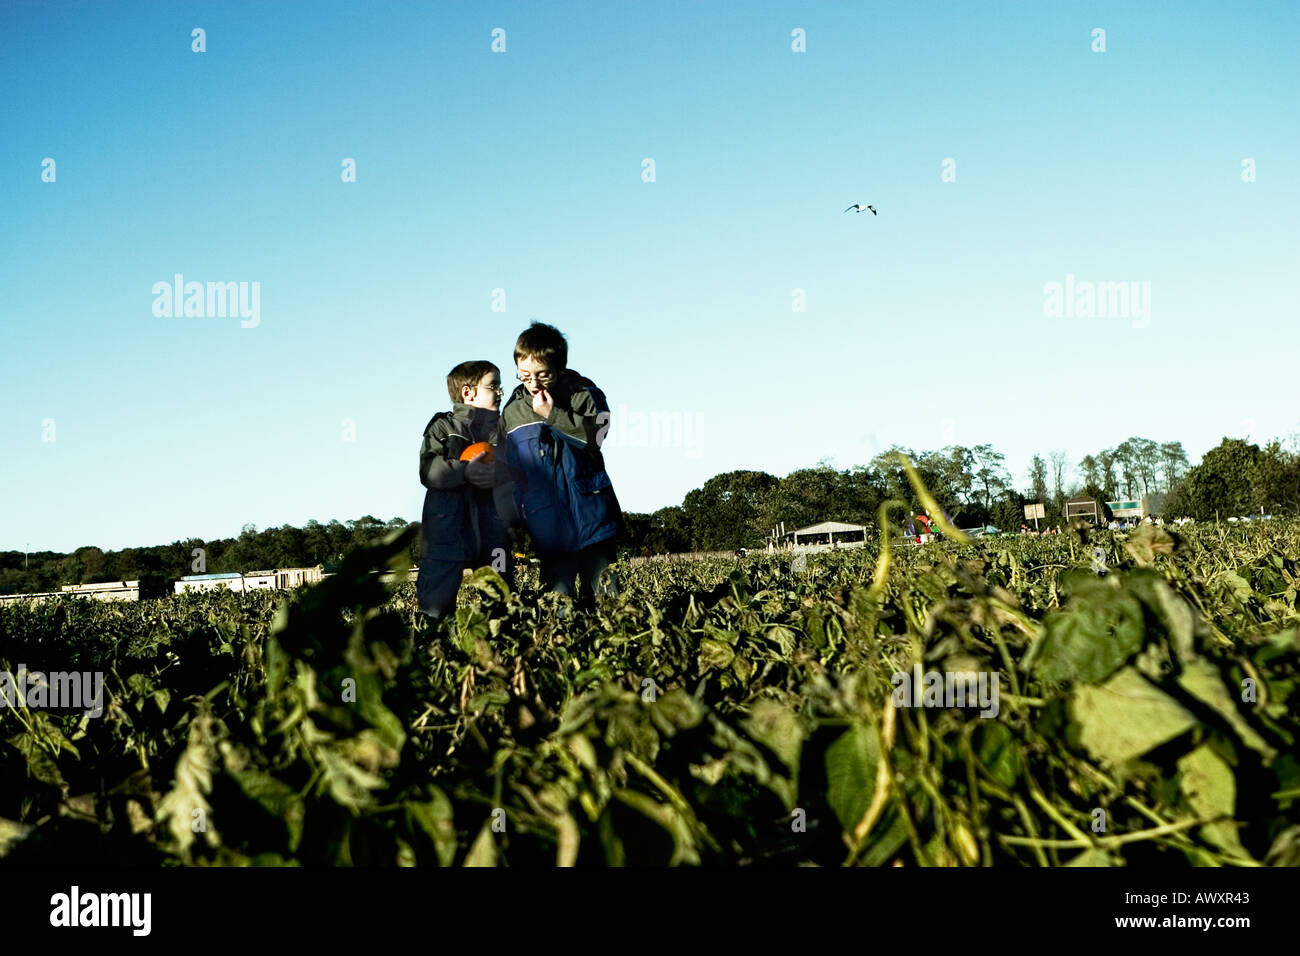 twin brothers boys standing in a green bean field on a farm chatting holding a pumpkin wearing coats in the autumn Stock Photo